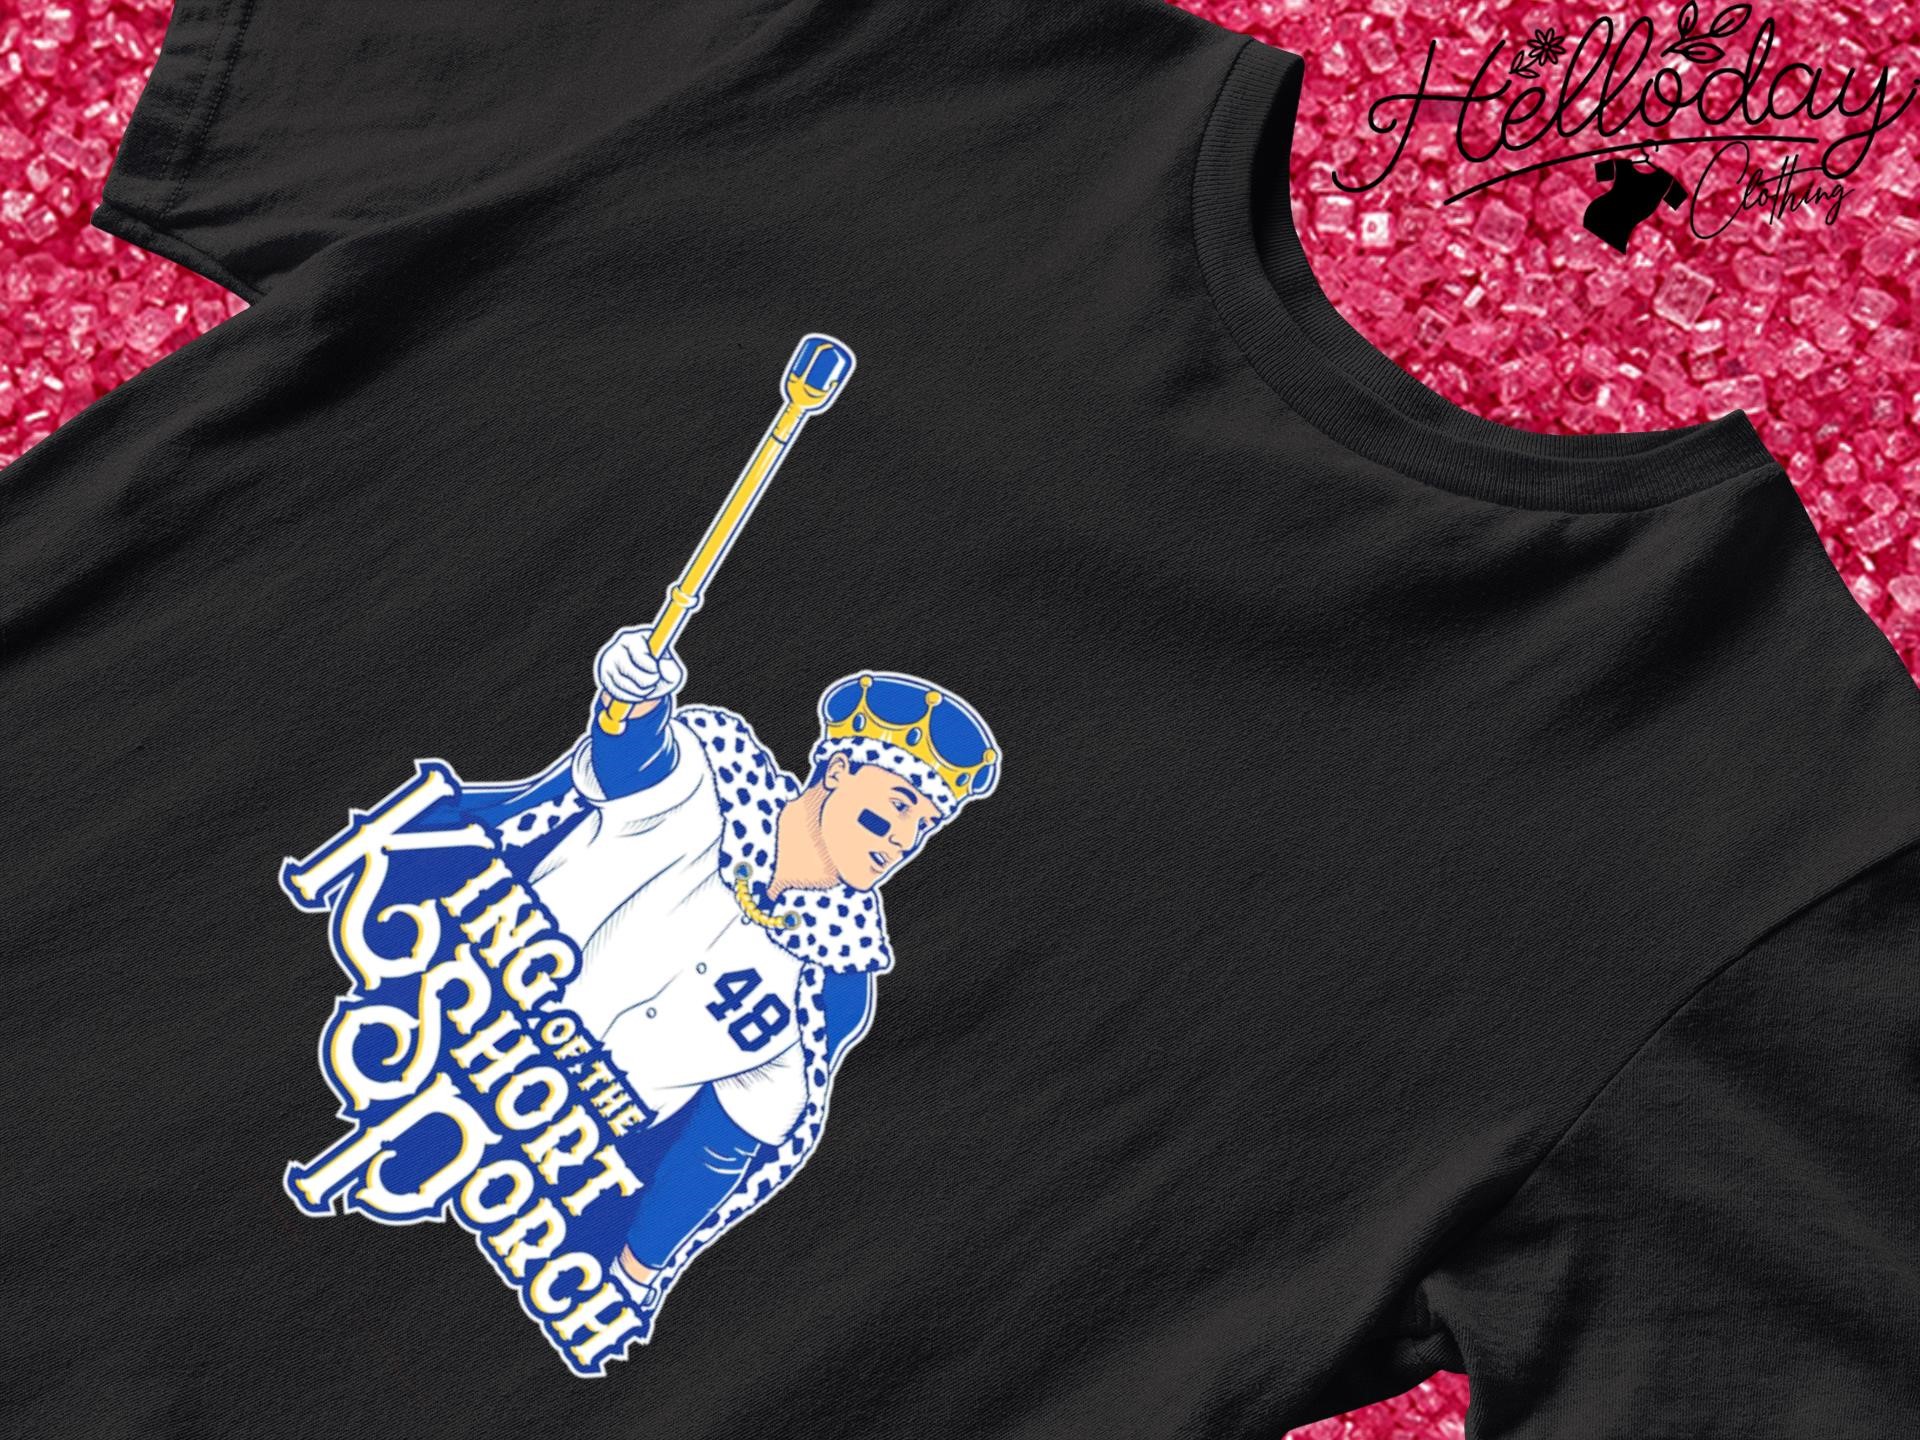 Anthony Rizzo King of the short porch shirt